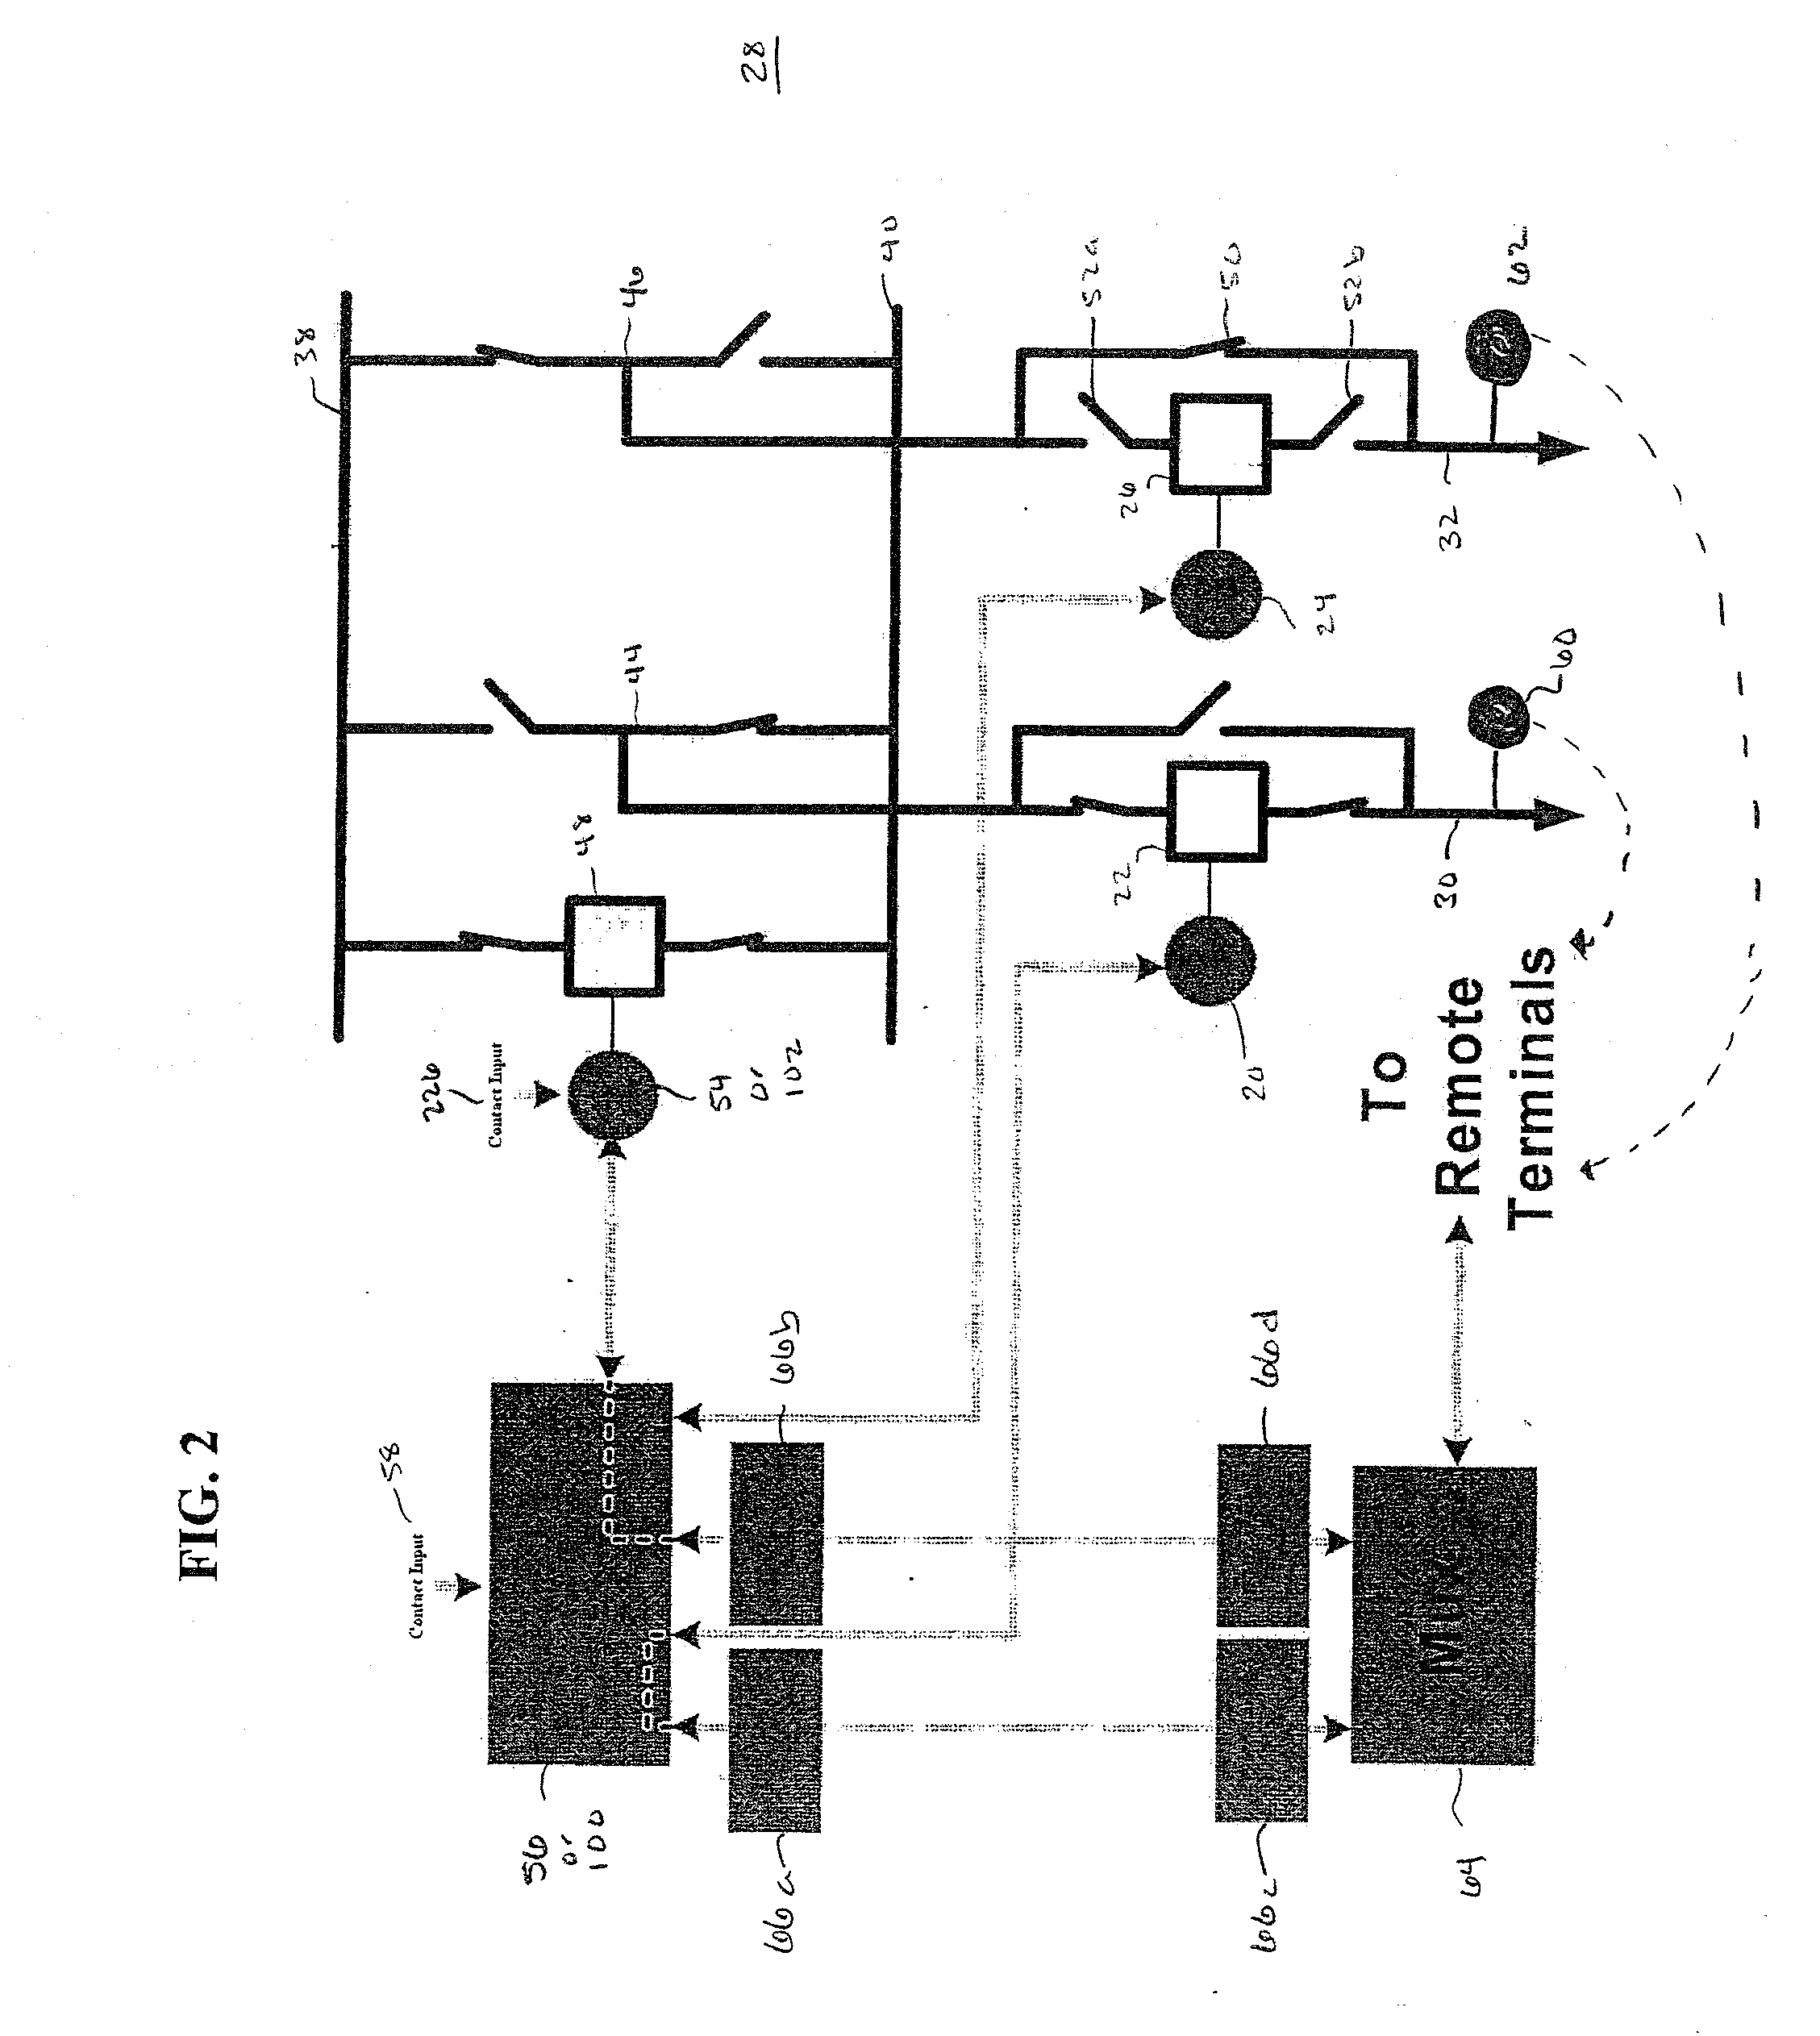 Method and apparatus for routing data streams among intelligent electronic devices